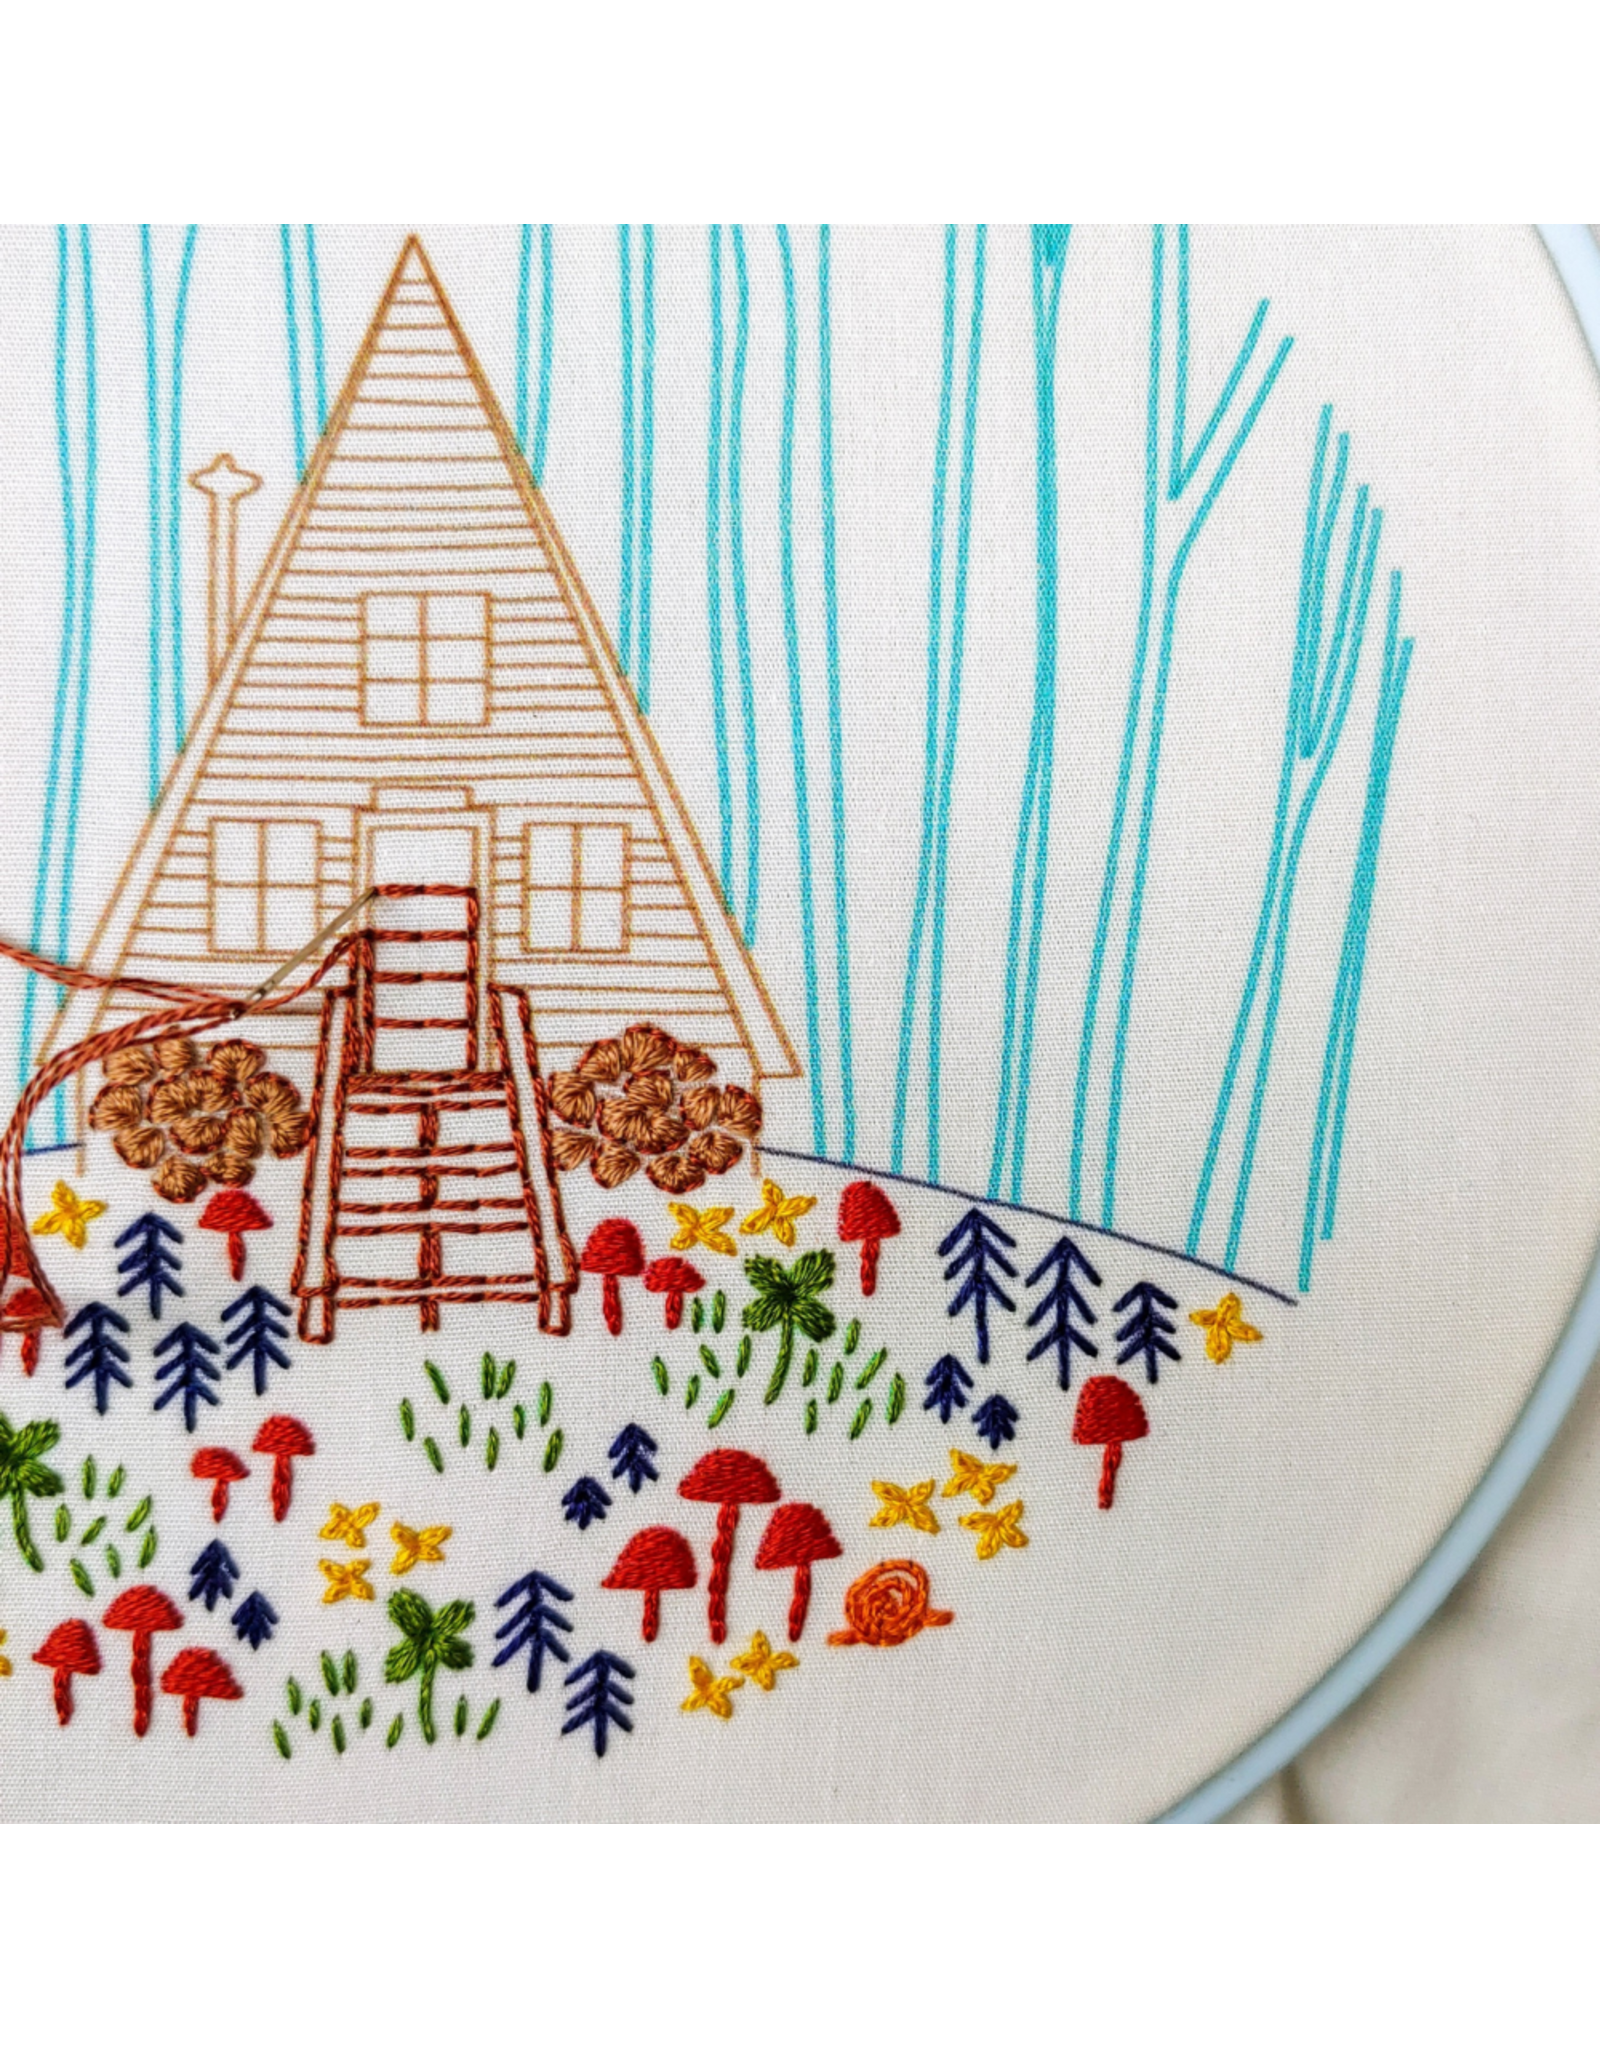 cozyblue *NEW* Cozy Cabin Embroidery Kit from cozyblue